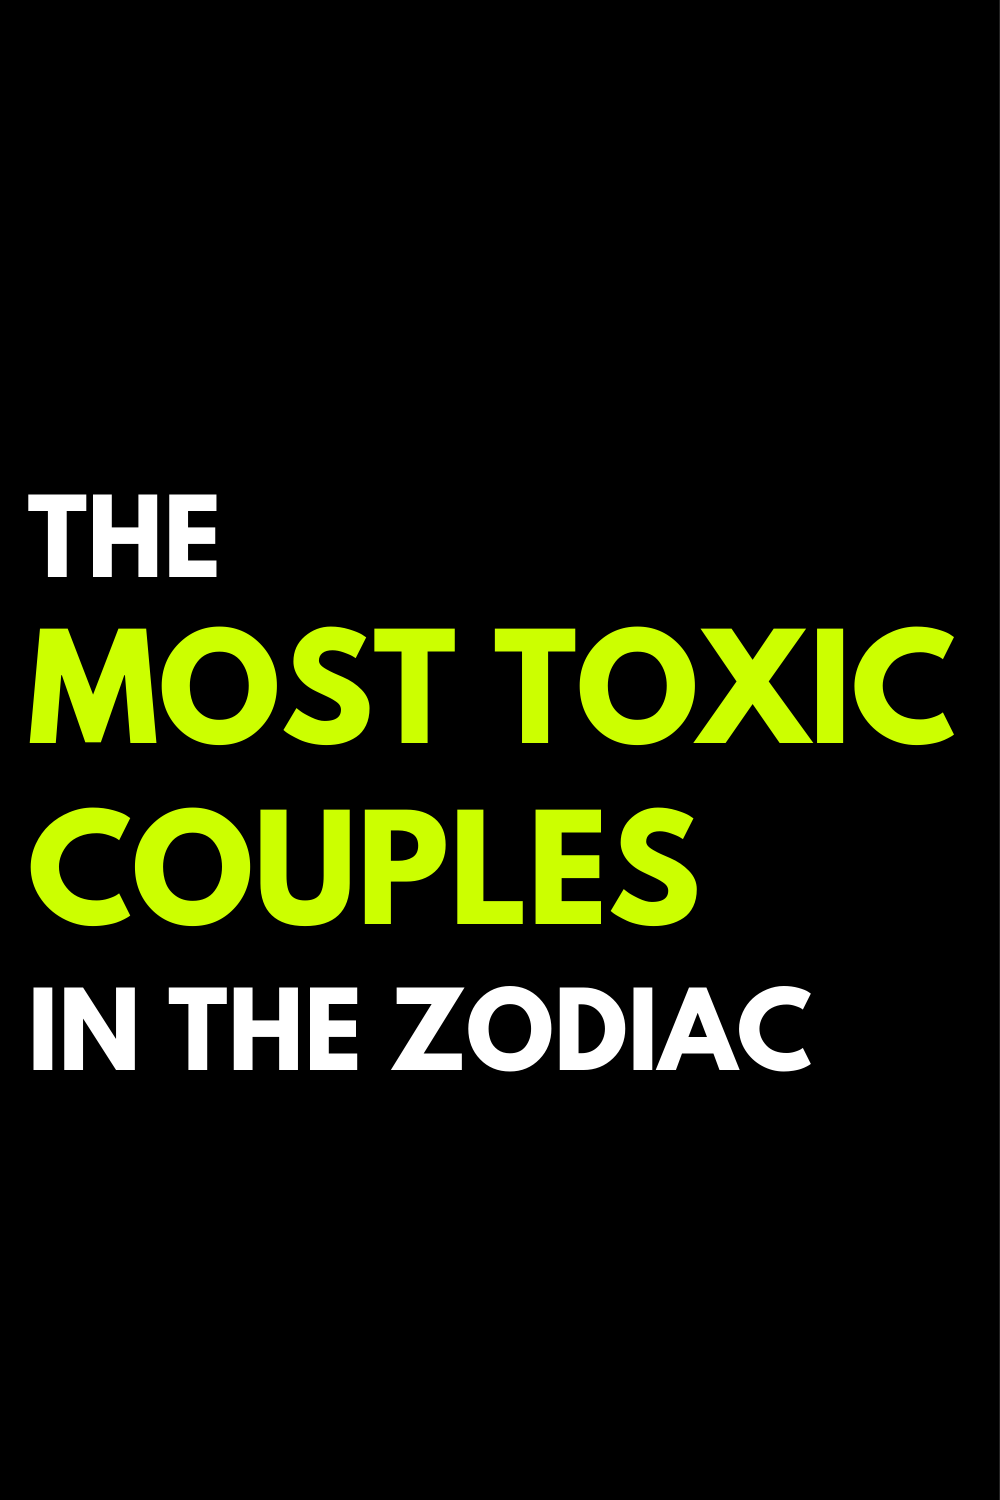 The most toxic couples in the zodiac